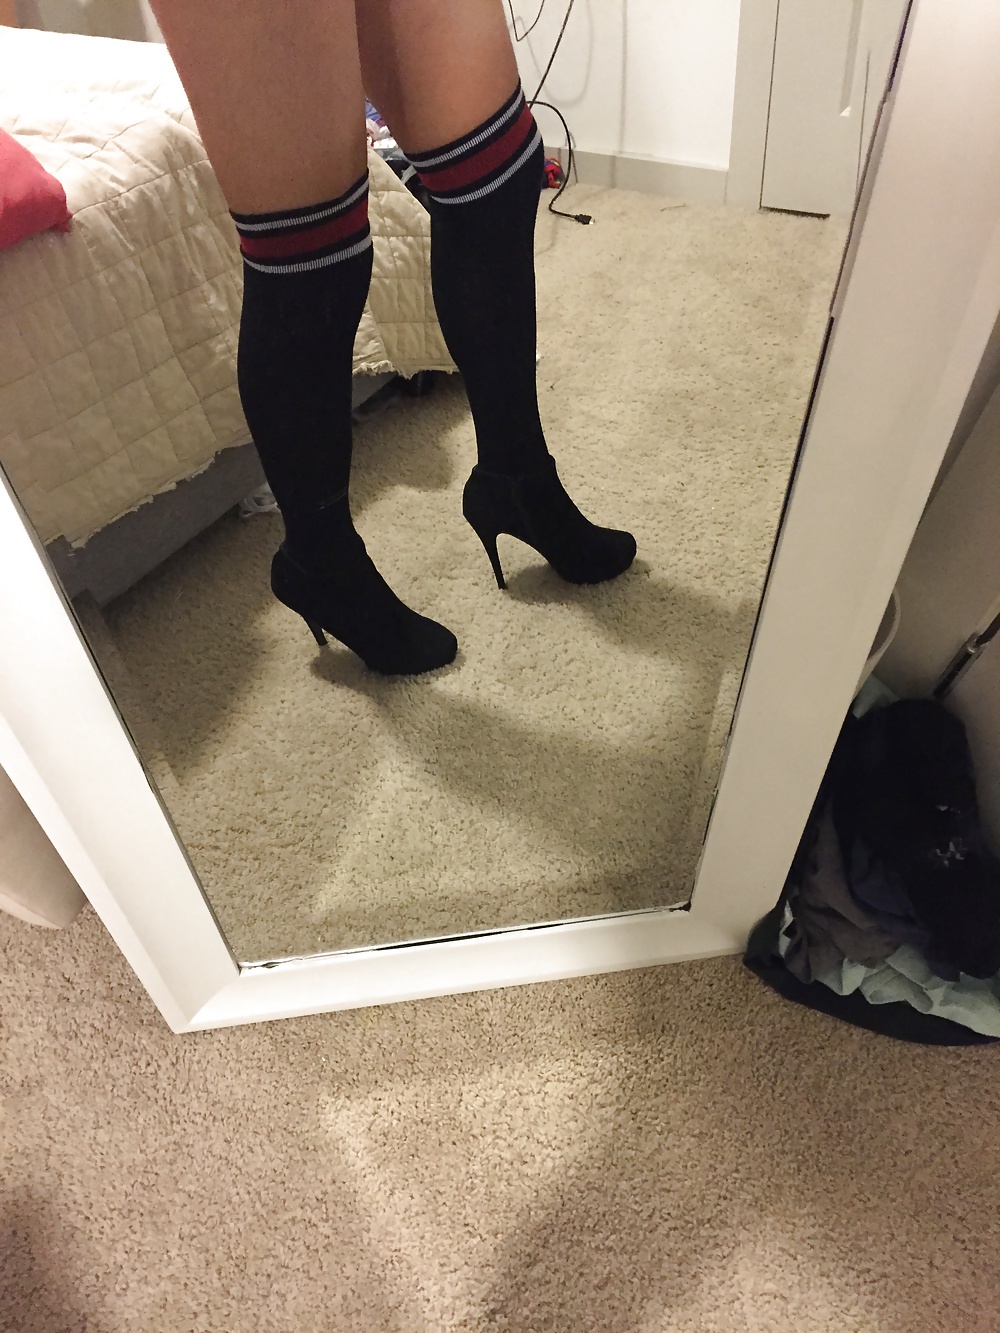 Knee high socks with boots (10/22)